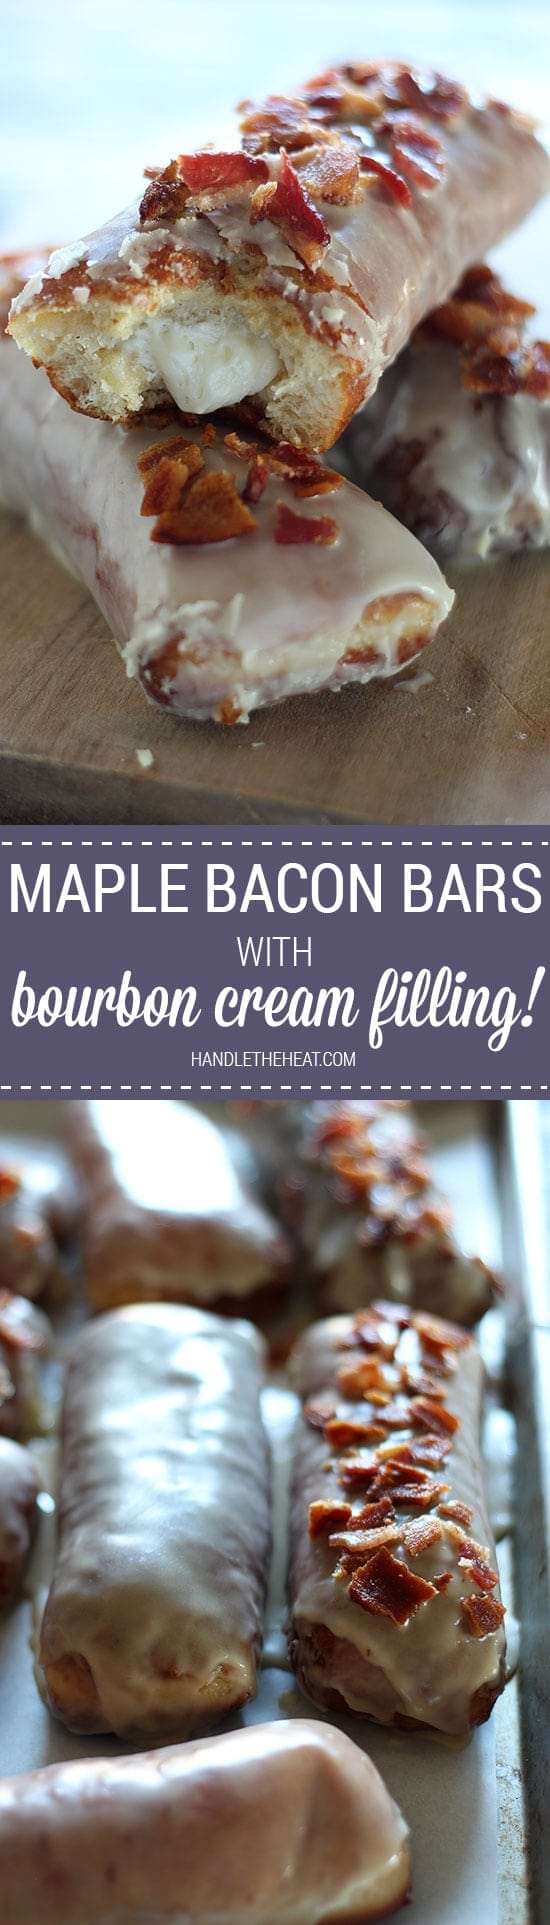 I will have dream about these Maple Bacon Bars with Bourbon Cream Filling! Not for the faint of heart! Ultimate salty sweet decadence with every fluffy, creamy, crispy bite. Obsessed!